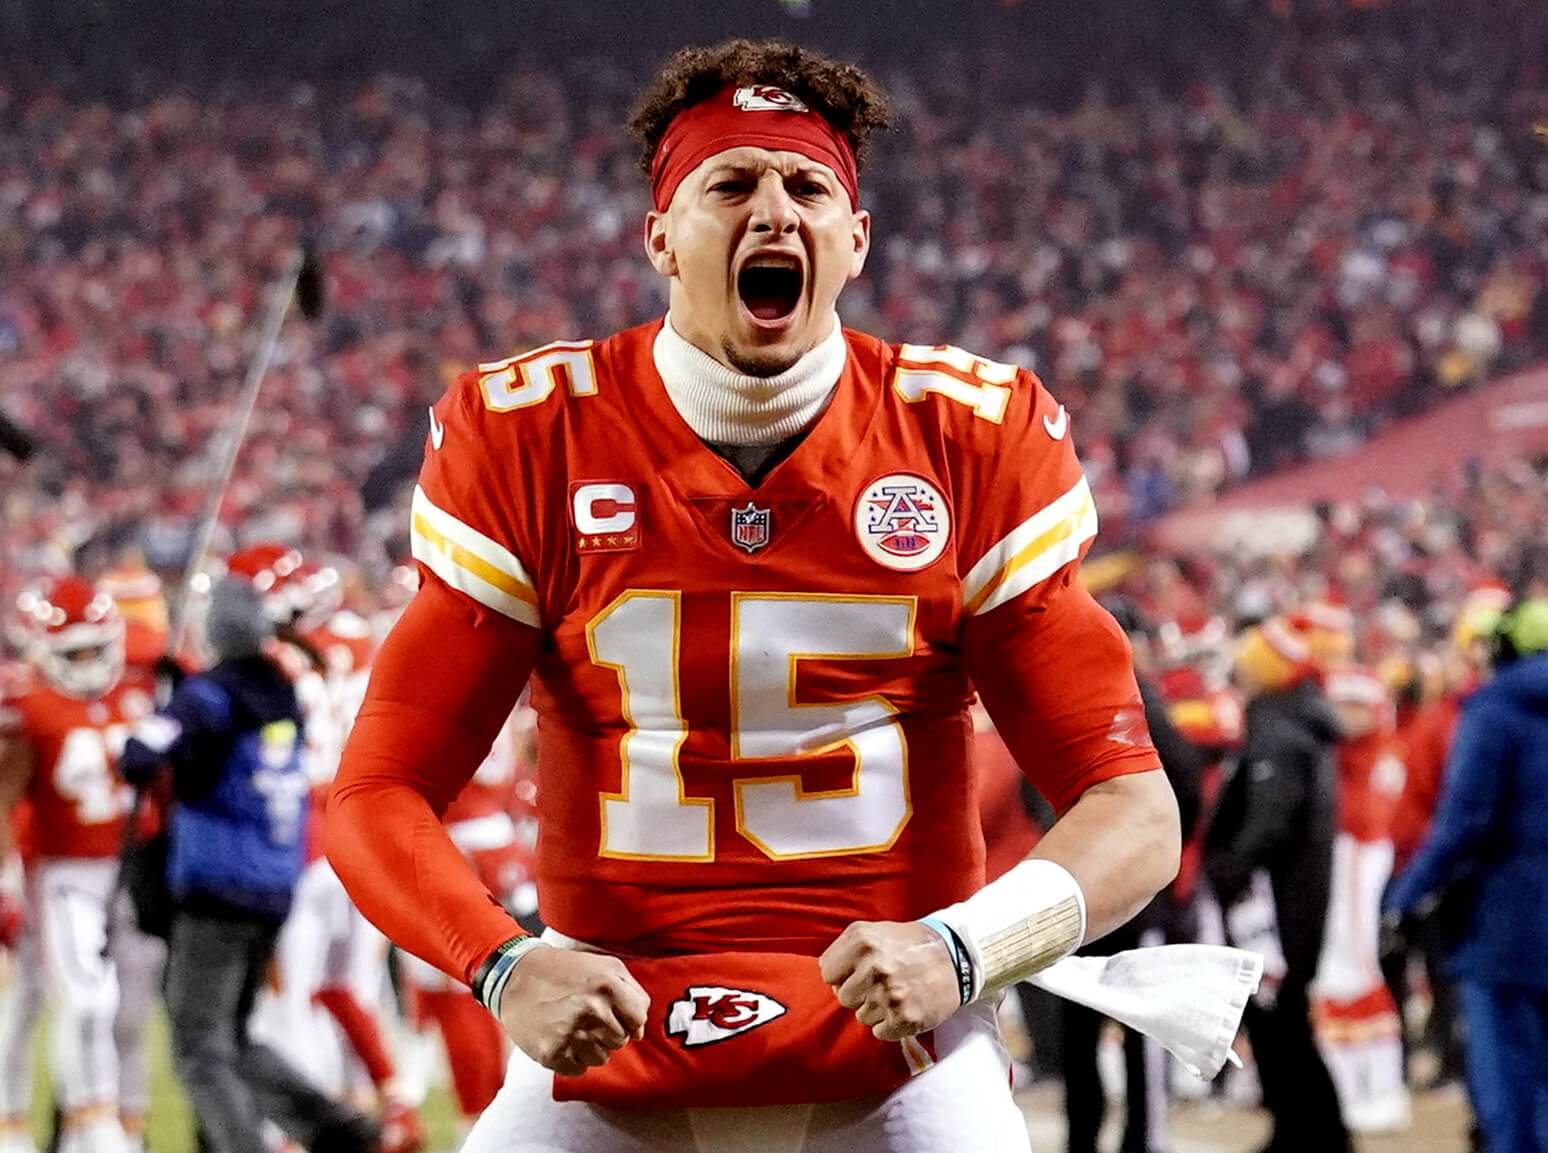 Raiders vs Chiefs: 5 best betting promos for Week 18 of the NFL